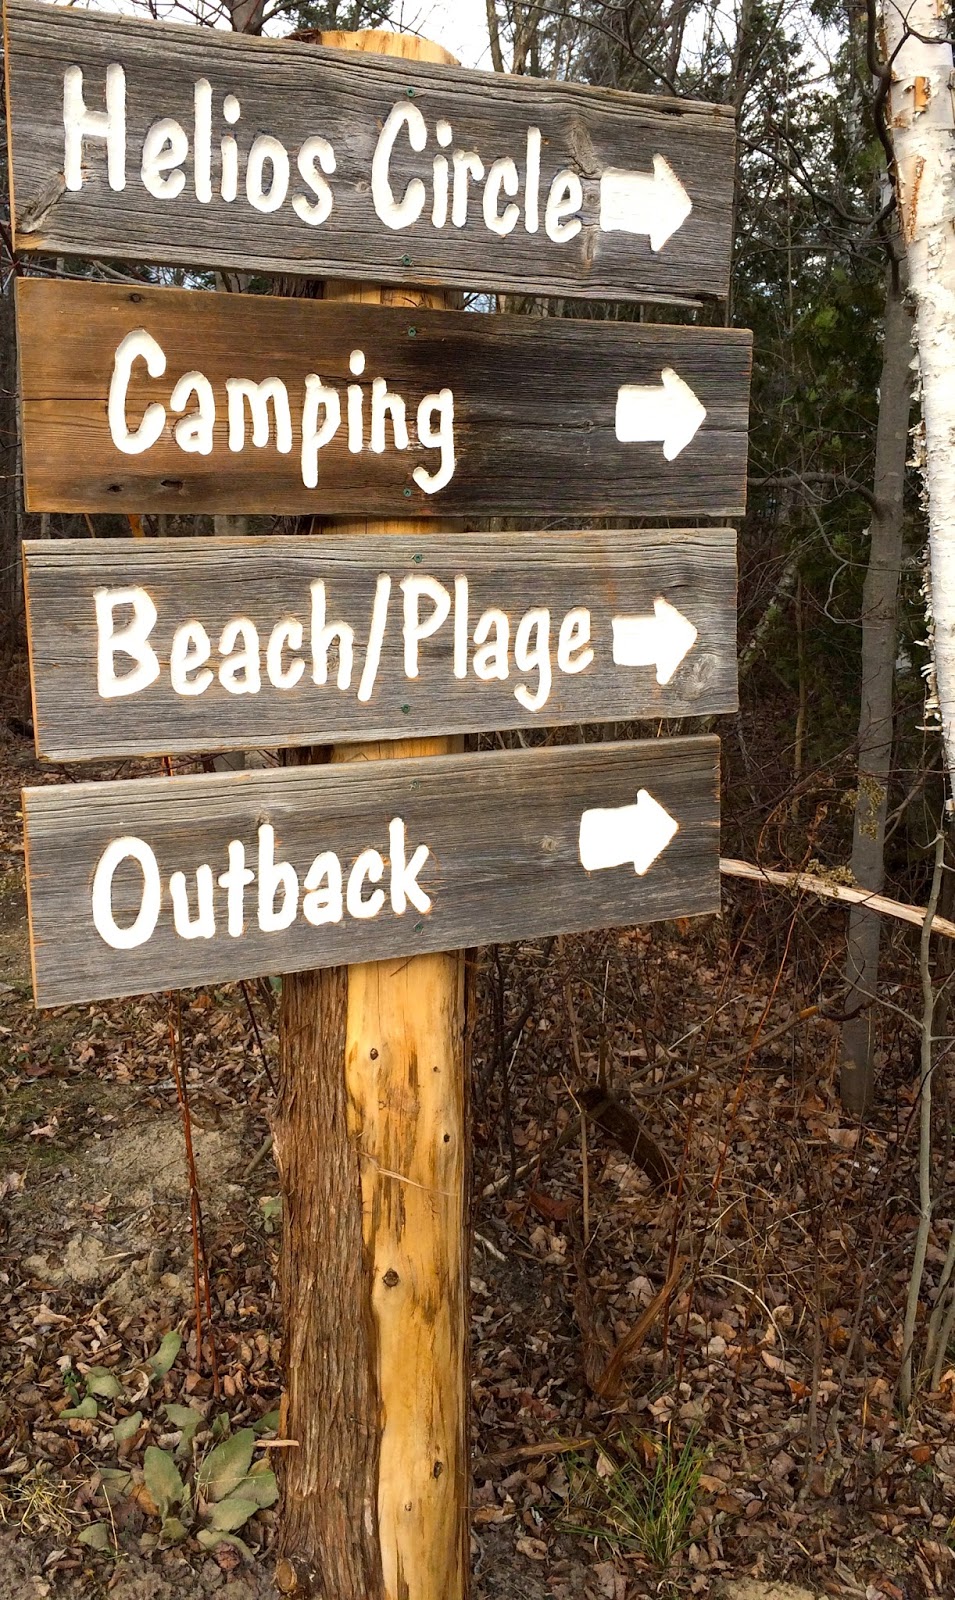 Directions to the beach, camping and other amenities